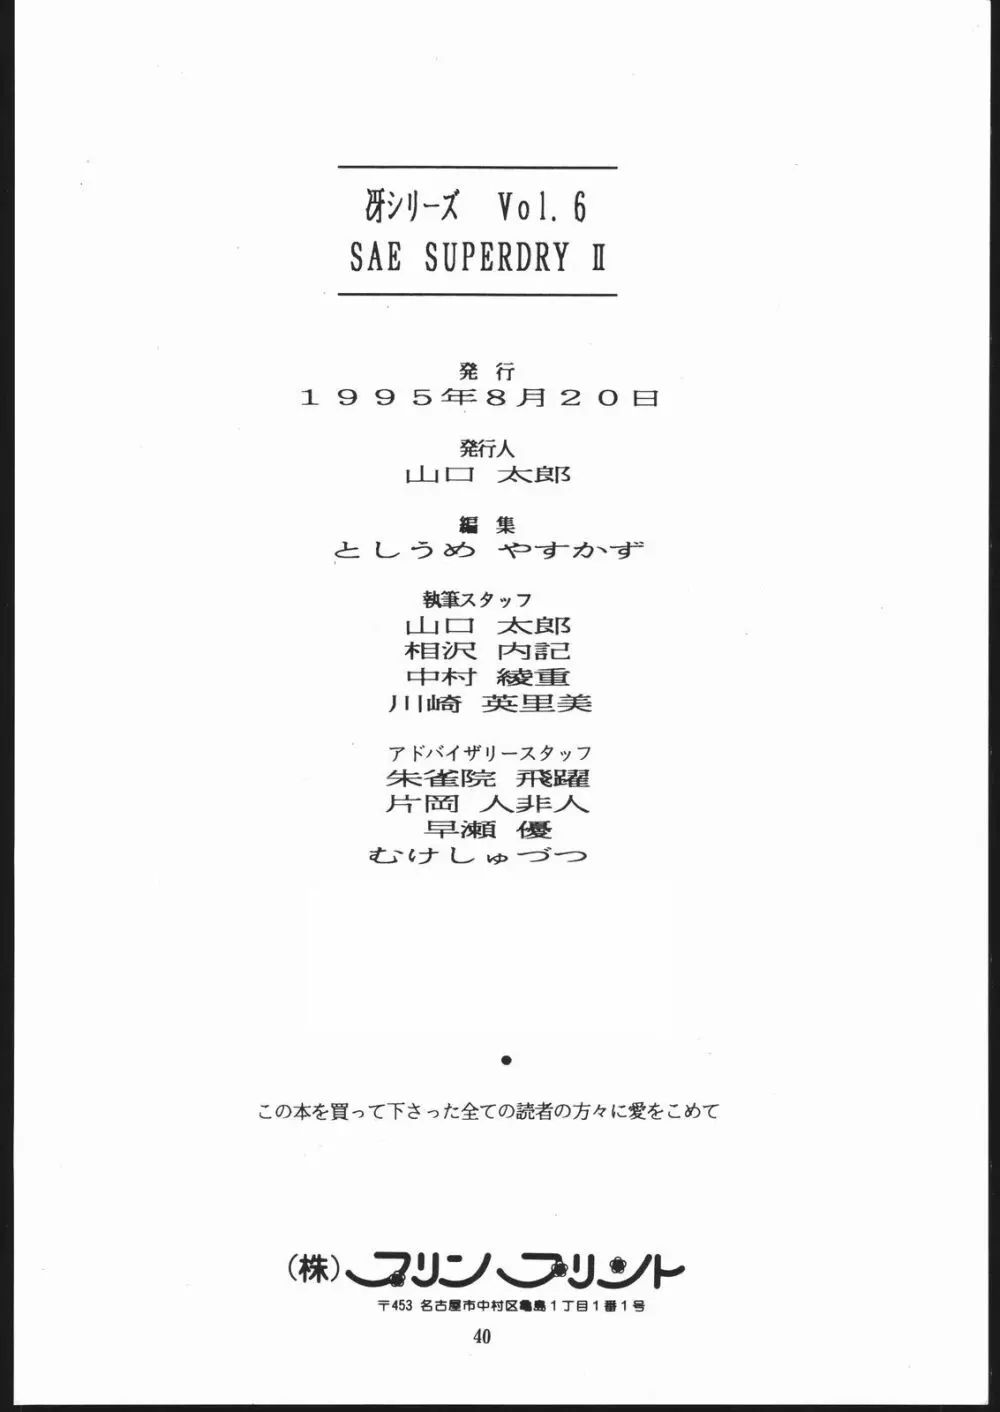 SAE SUPERDRY II Page.41